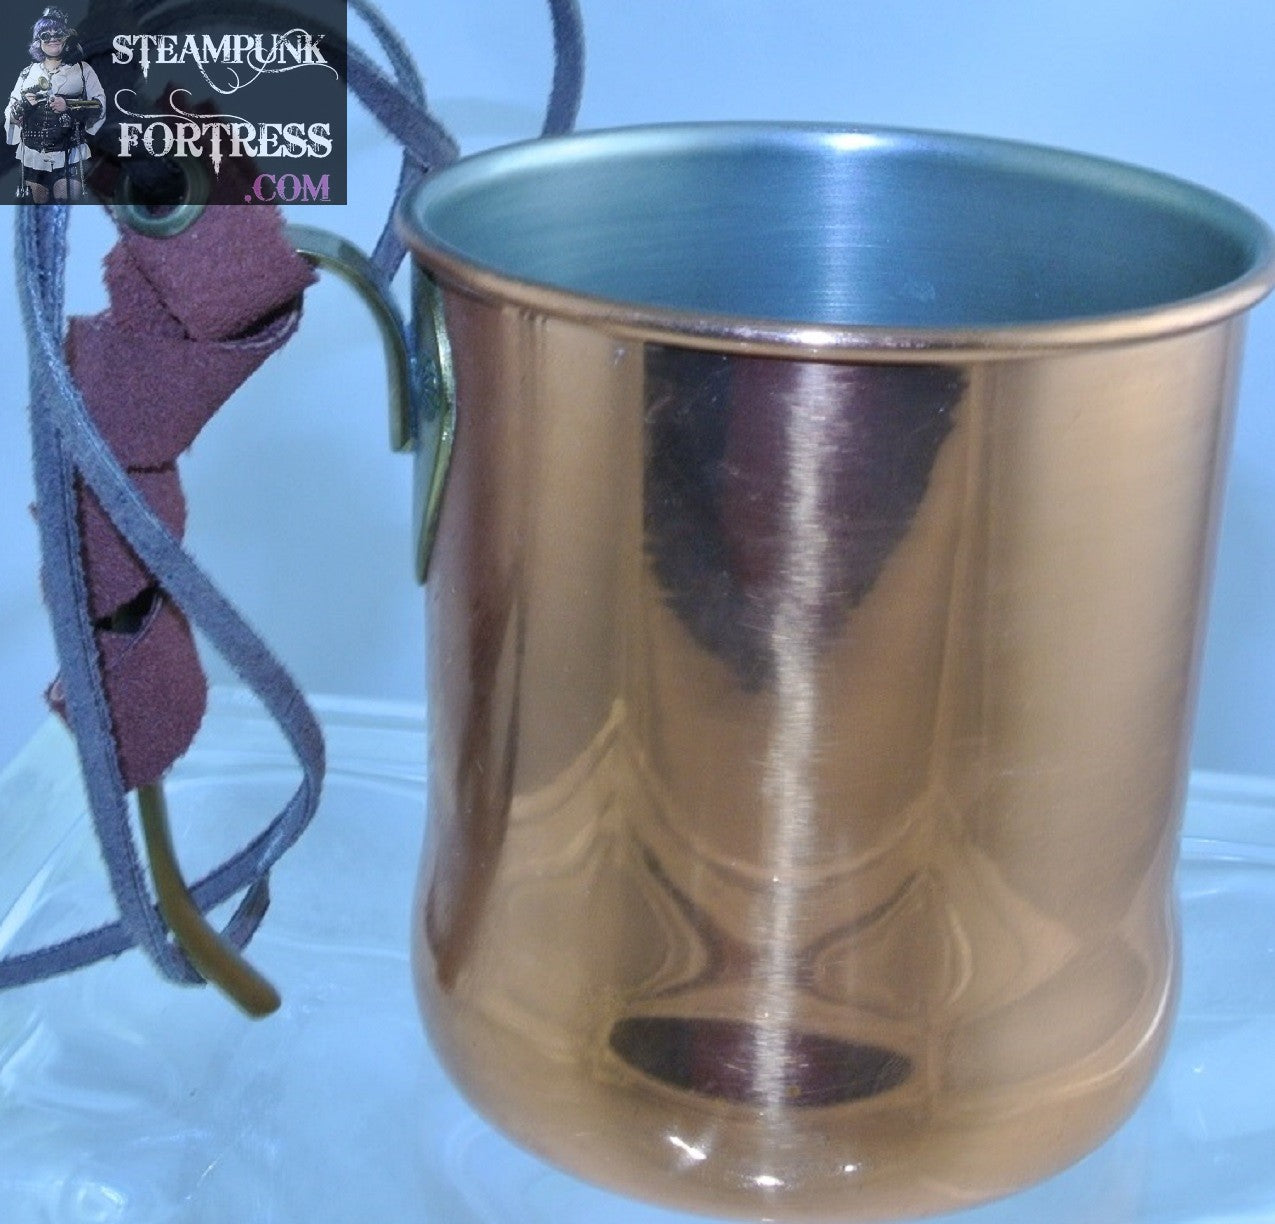 CUP COPPER BROWN SUEDE WRAP TIE BRASS HANDLE MUG TEA DUELING DUELLING STARR WILDE STEAMPUNK FORTRESS COSPLAY COSTUME